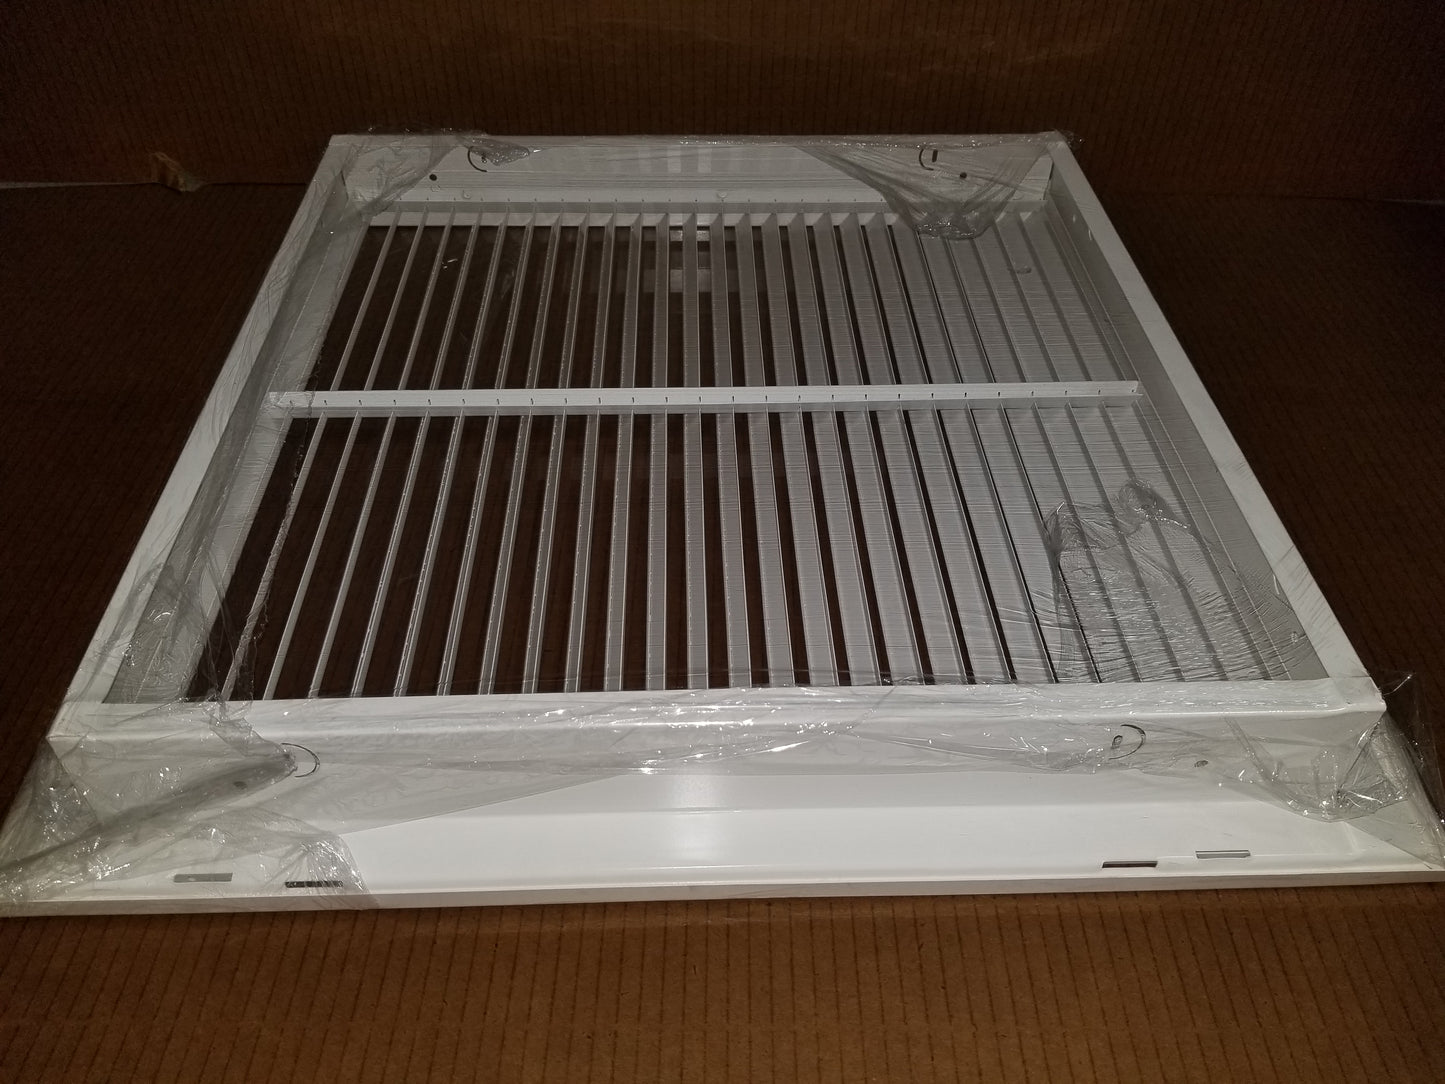 20" X 20" WHITE STEEL FIXED BAR HORIZONTAL FILTER GRILLE